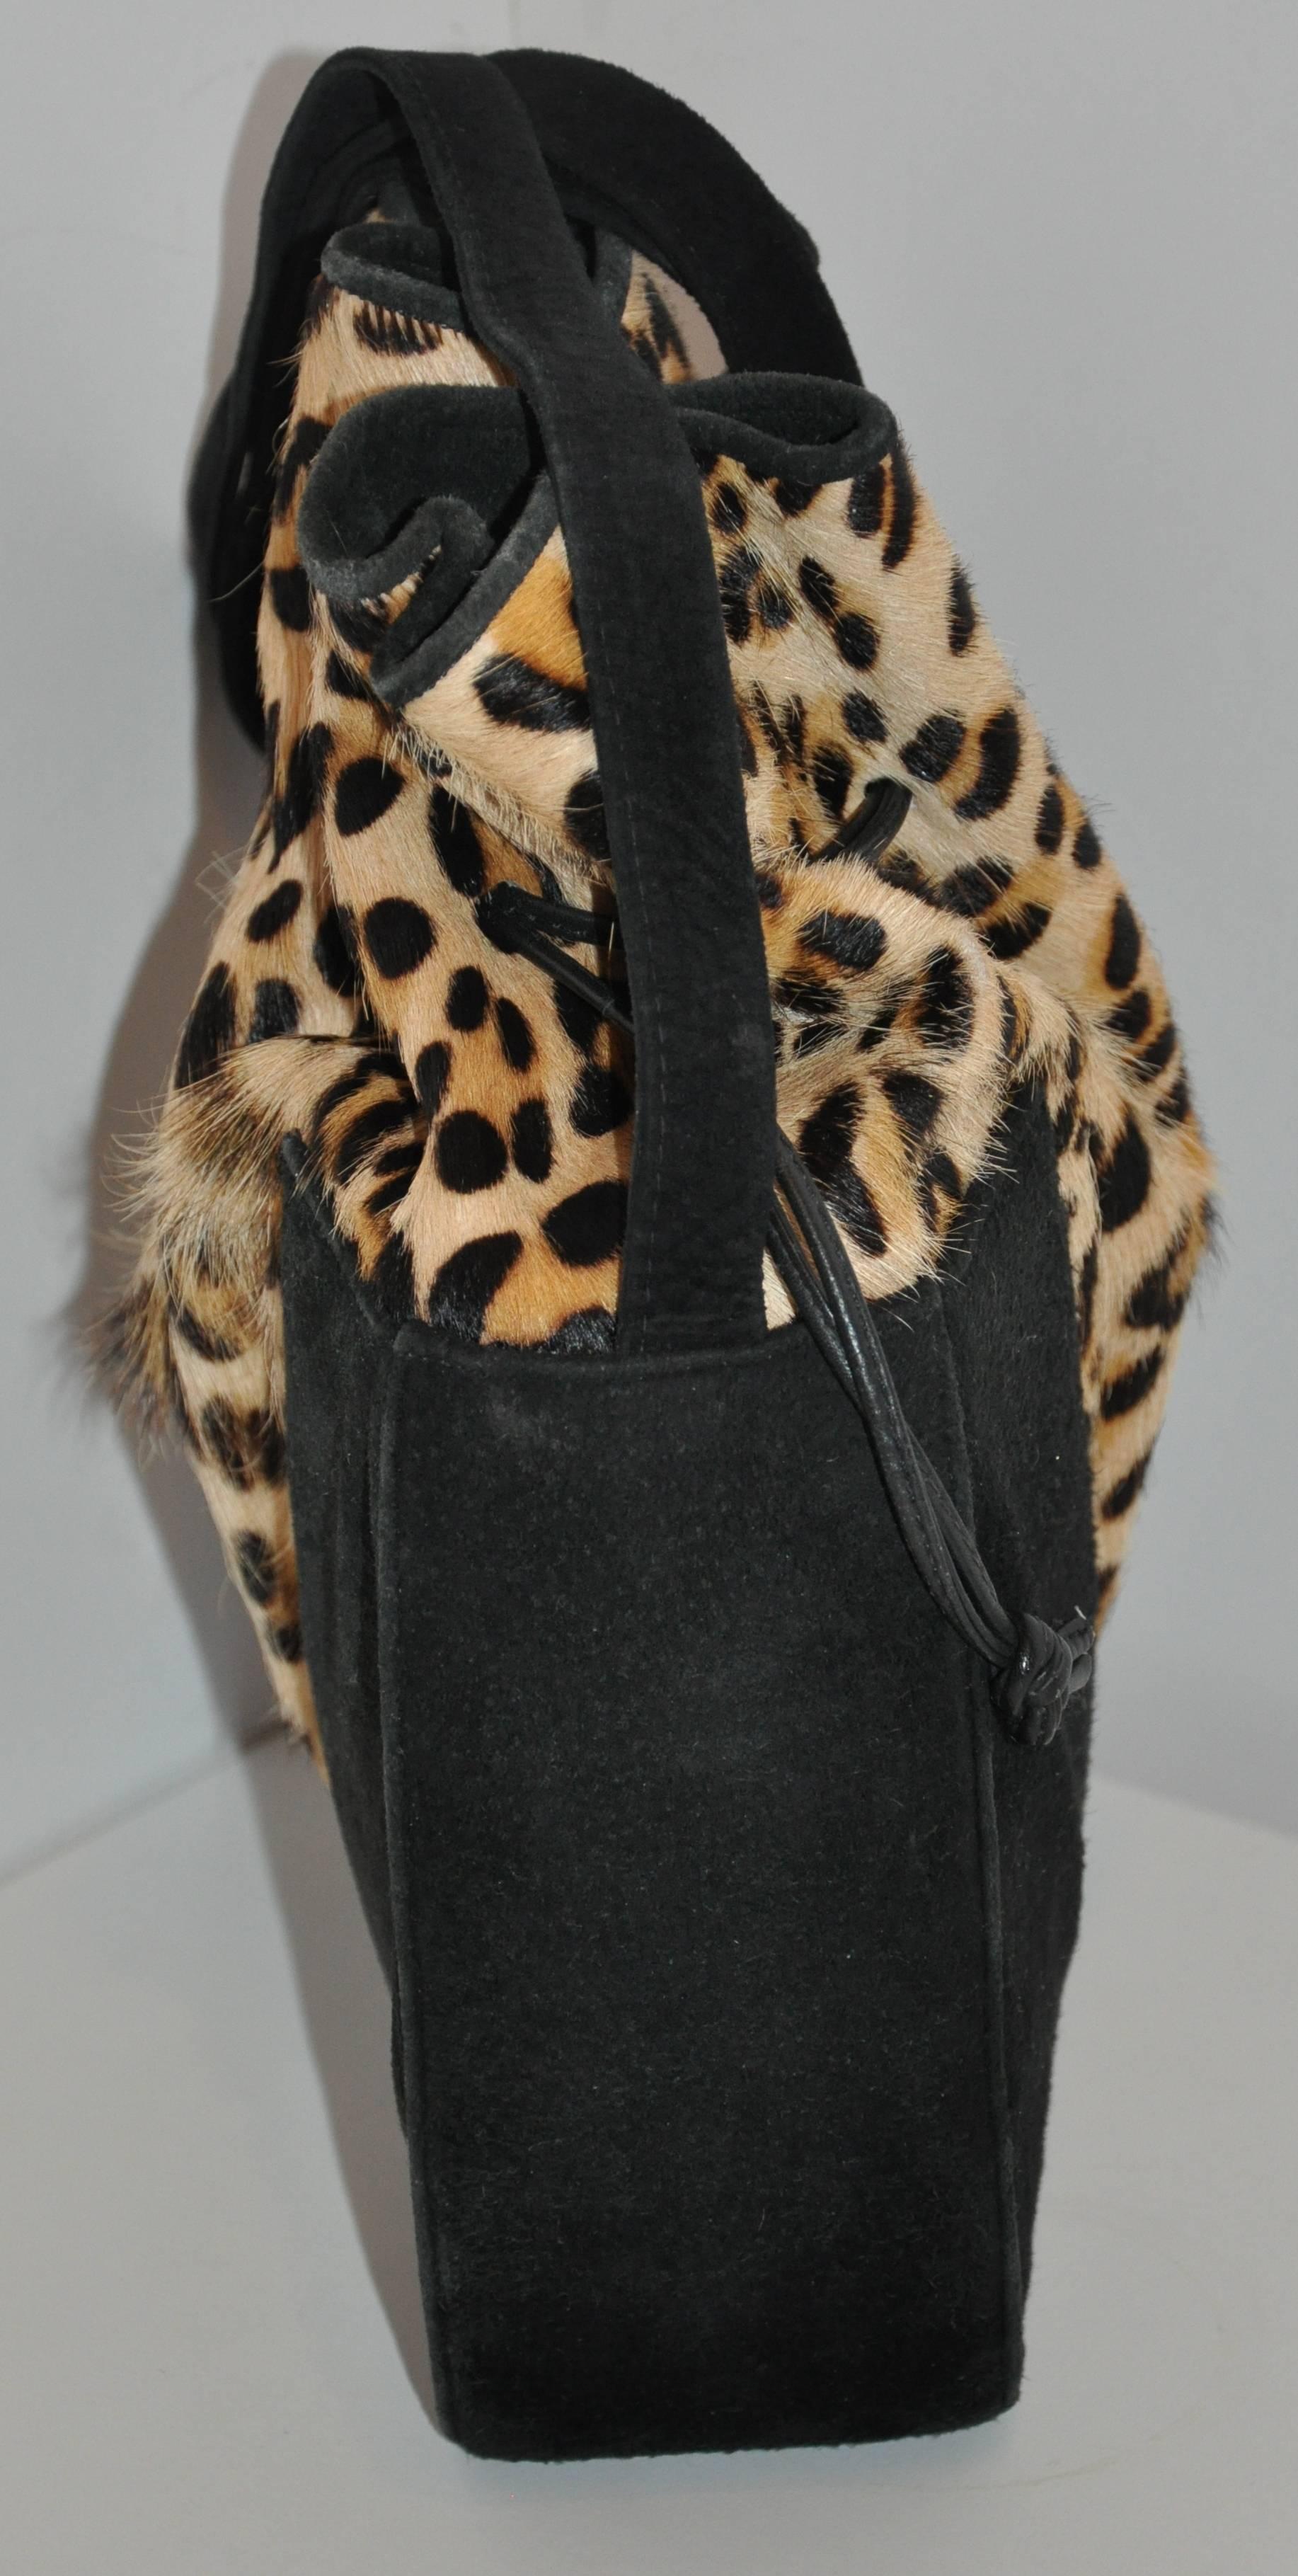            Gino black suede & leopard print stamped pony-skin hobo-style shoulder bag is fully lined with black. The height of the bag measures 12", length is 10 1/8", depth is 3 1/4". The shoulder straps stands at 20 1/2" in